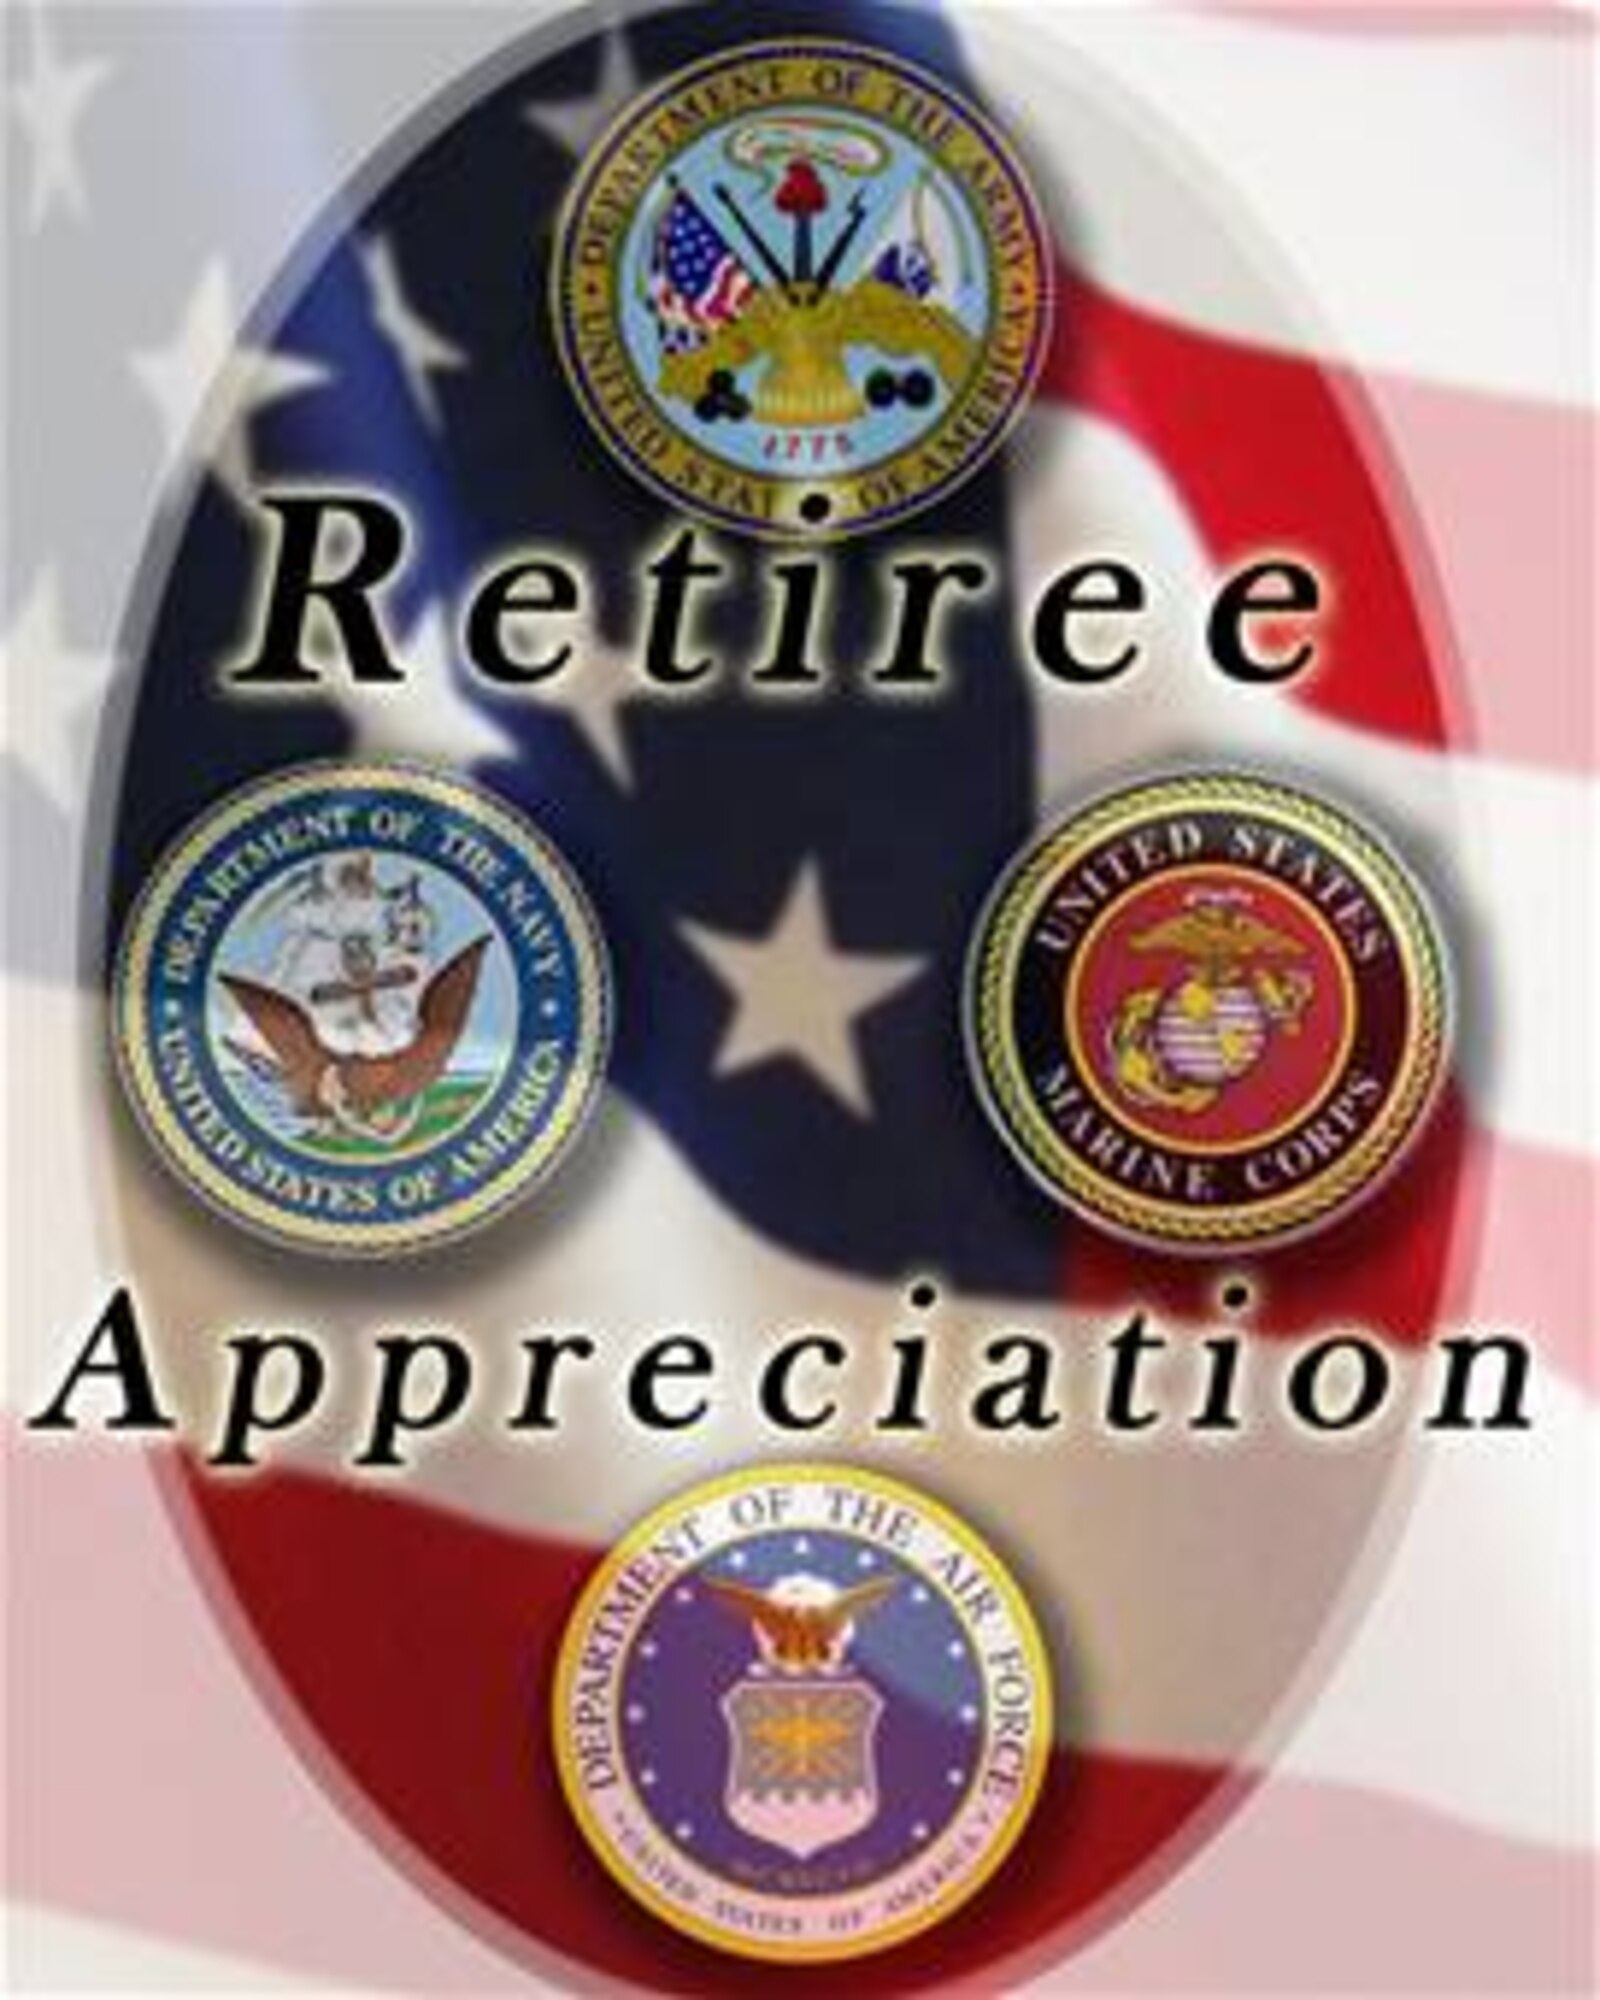 The 36th Wing is scheduled to host its annual Retiree Appreciation Day at 8 a.m. Nov. 5 at the Sunrise Conference Center here.